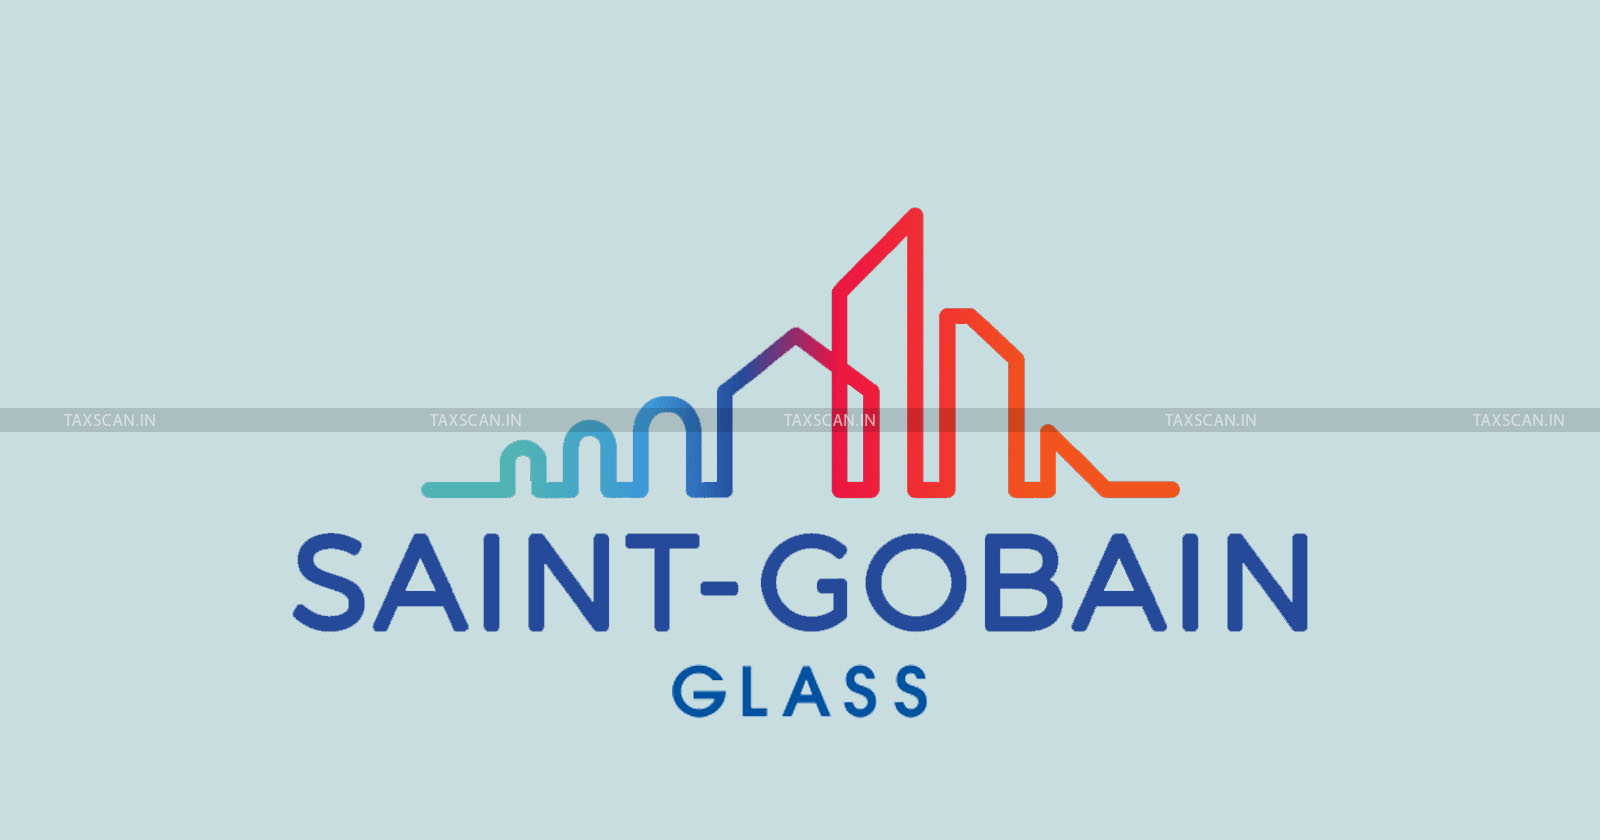 On-Site Emergency medical services - Emergency medical services - Input Service - CESTAT disallows Cenvat Credit - Cenvat Credit Claim - Saint Gobain Glass - TAXSCAN